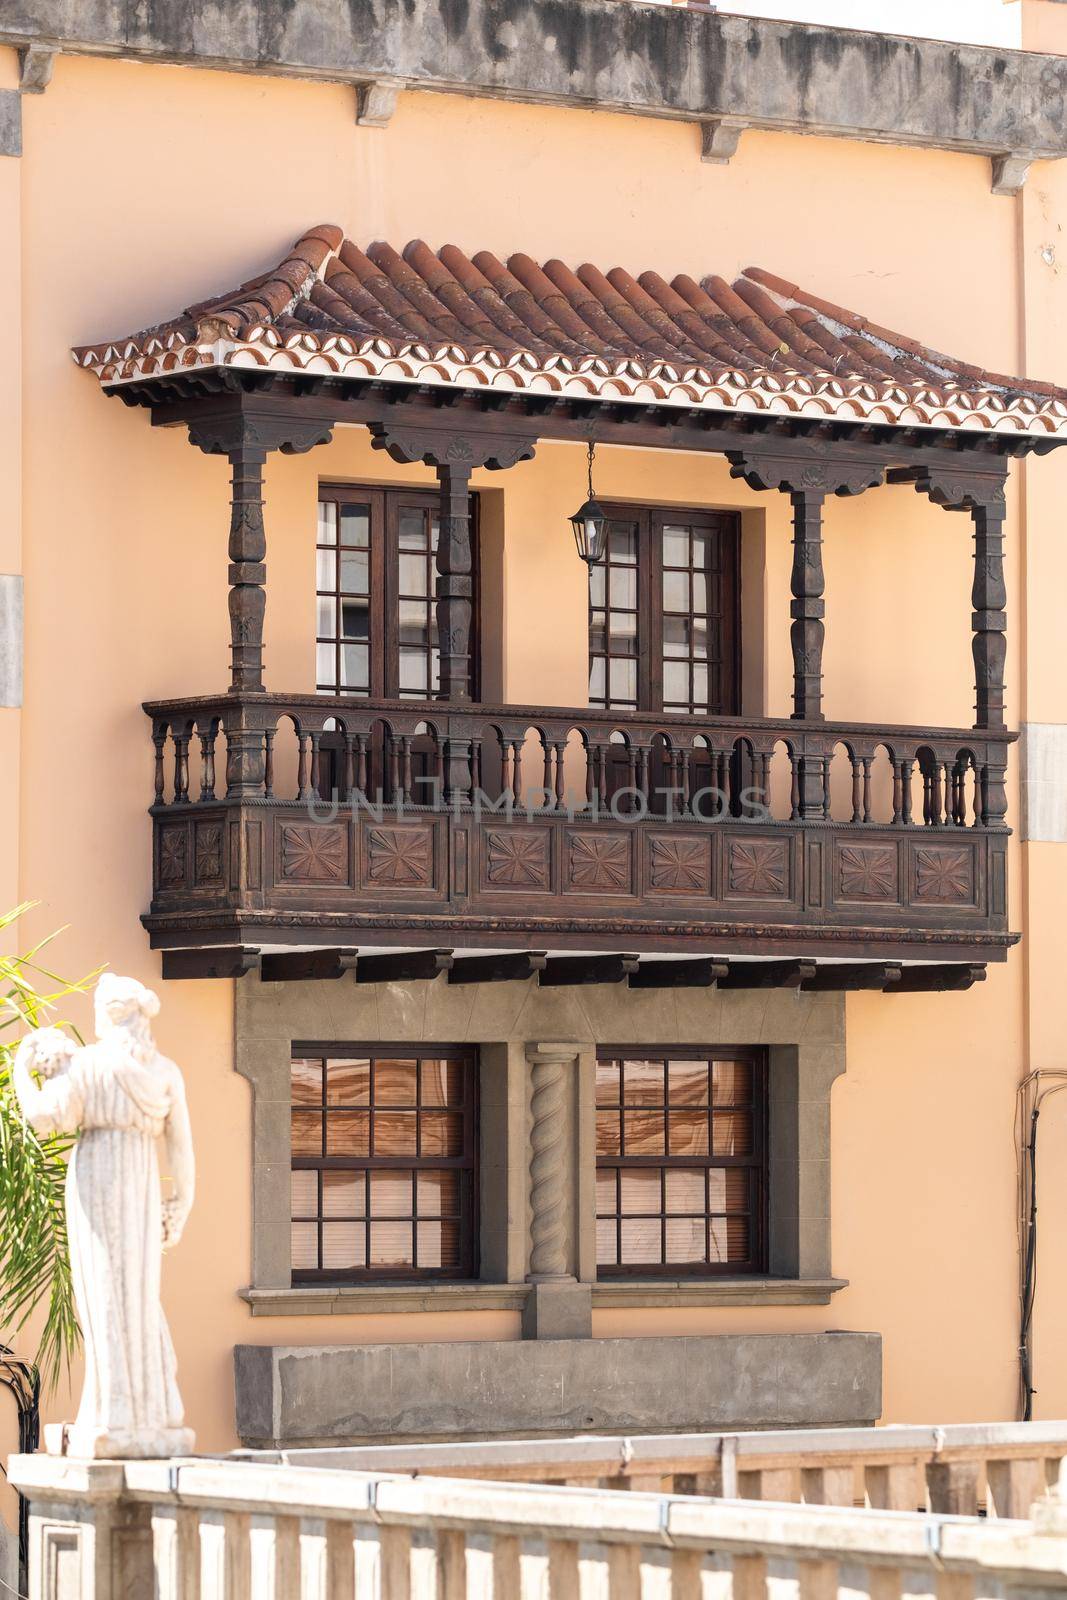 Beautiful old wooden balcony on the island of Tenerife in the Canary Islands.Spain.